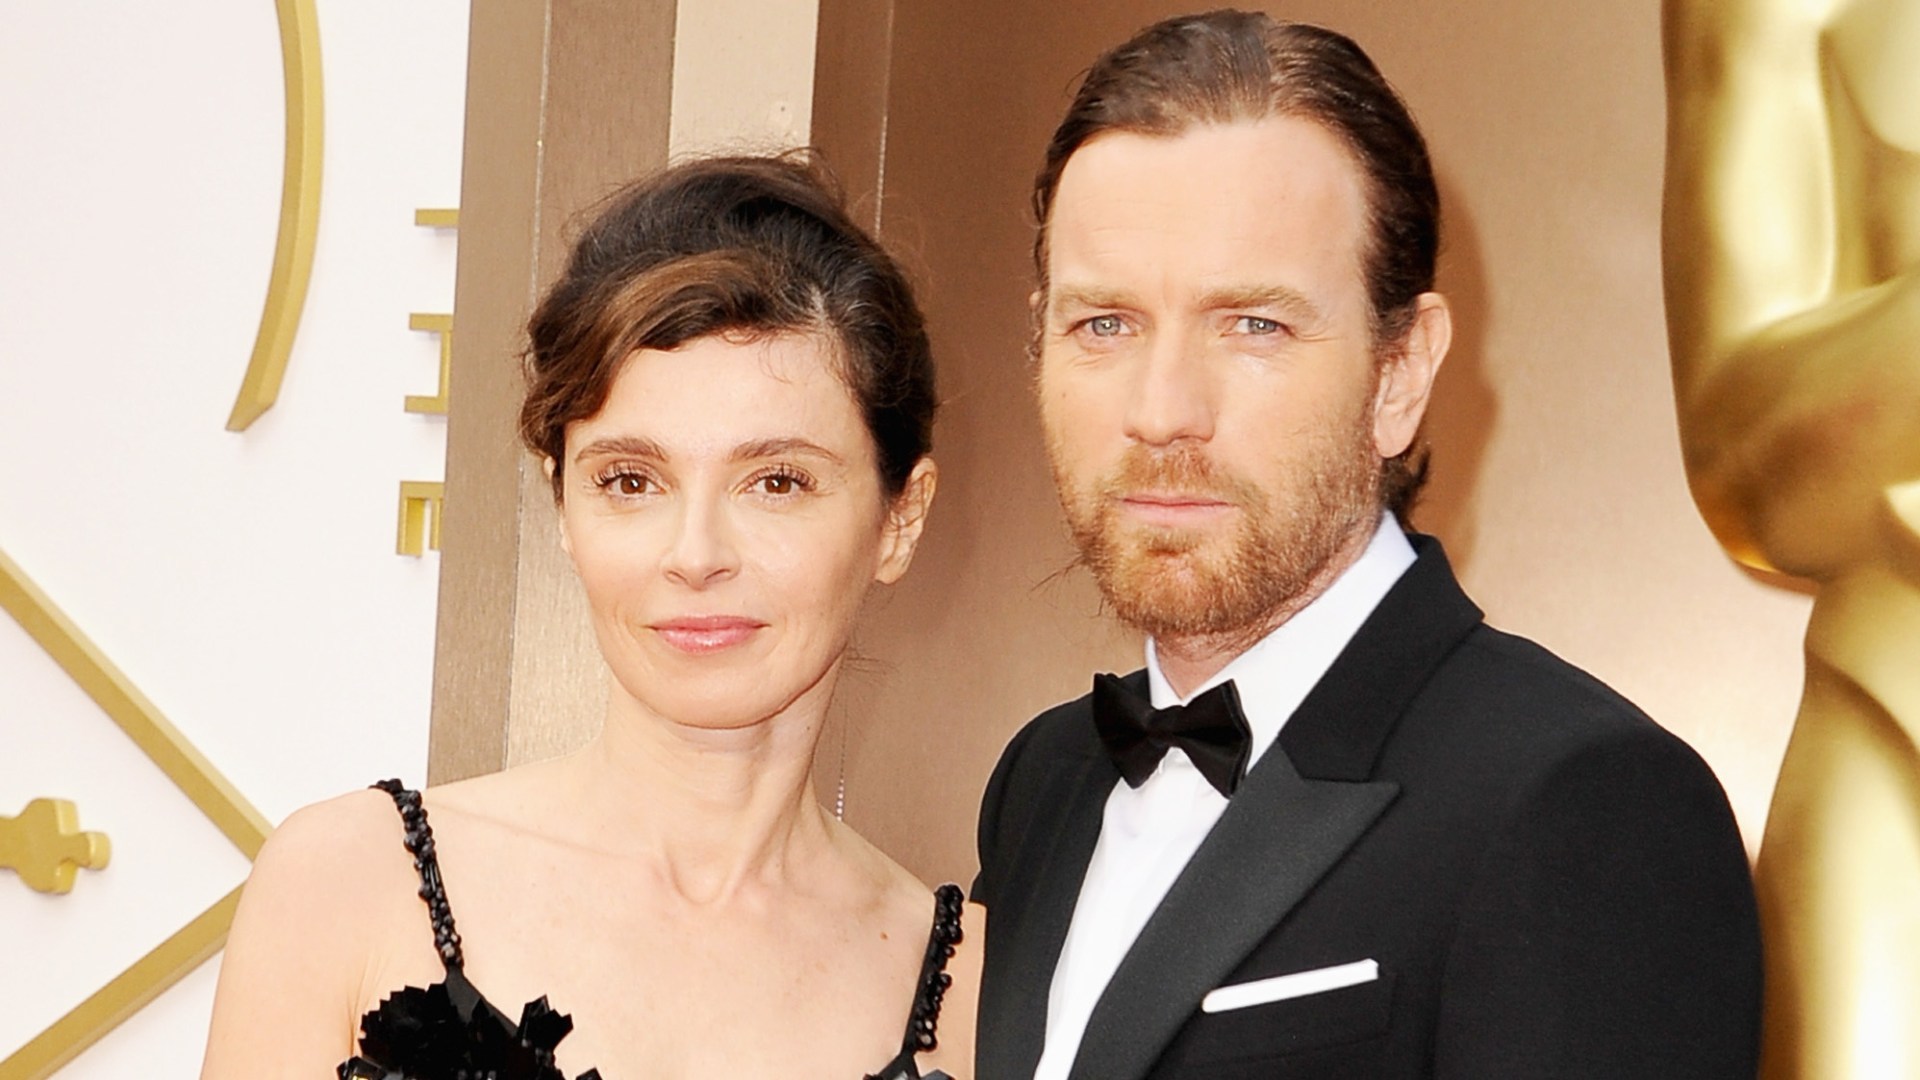 Ewan Mcgregor And Wife To Divorce After 22 Years Of Marriage